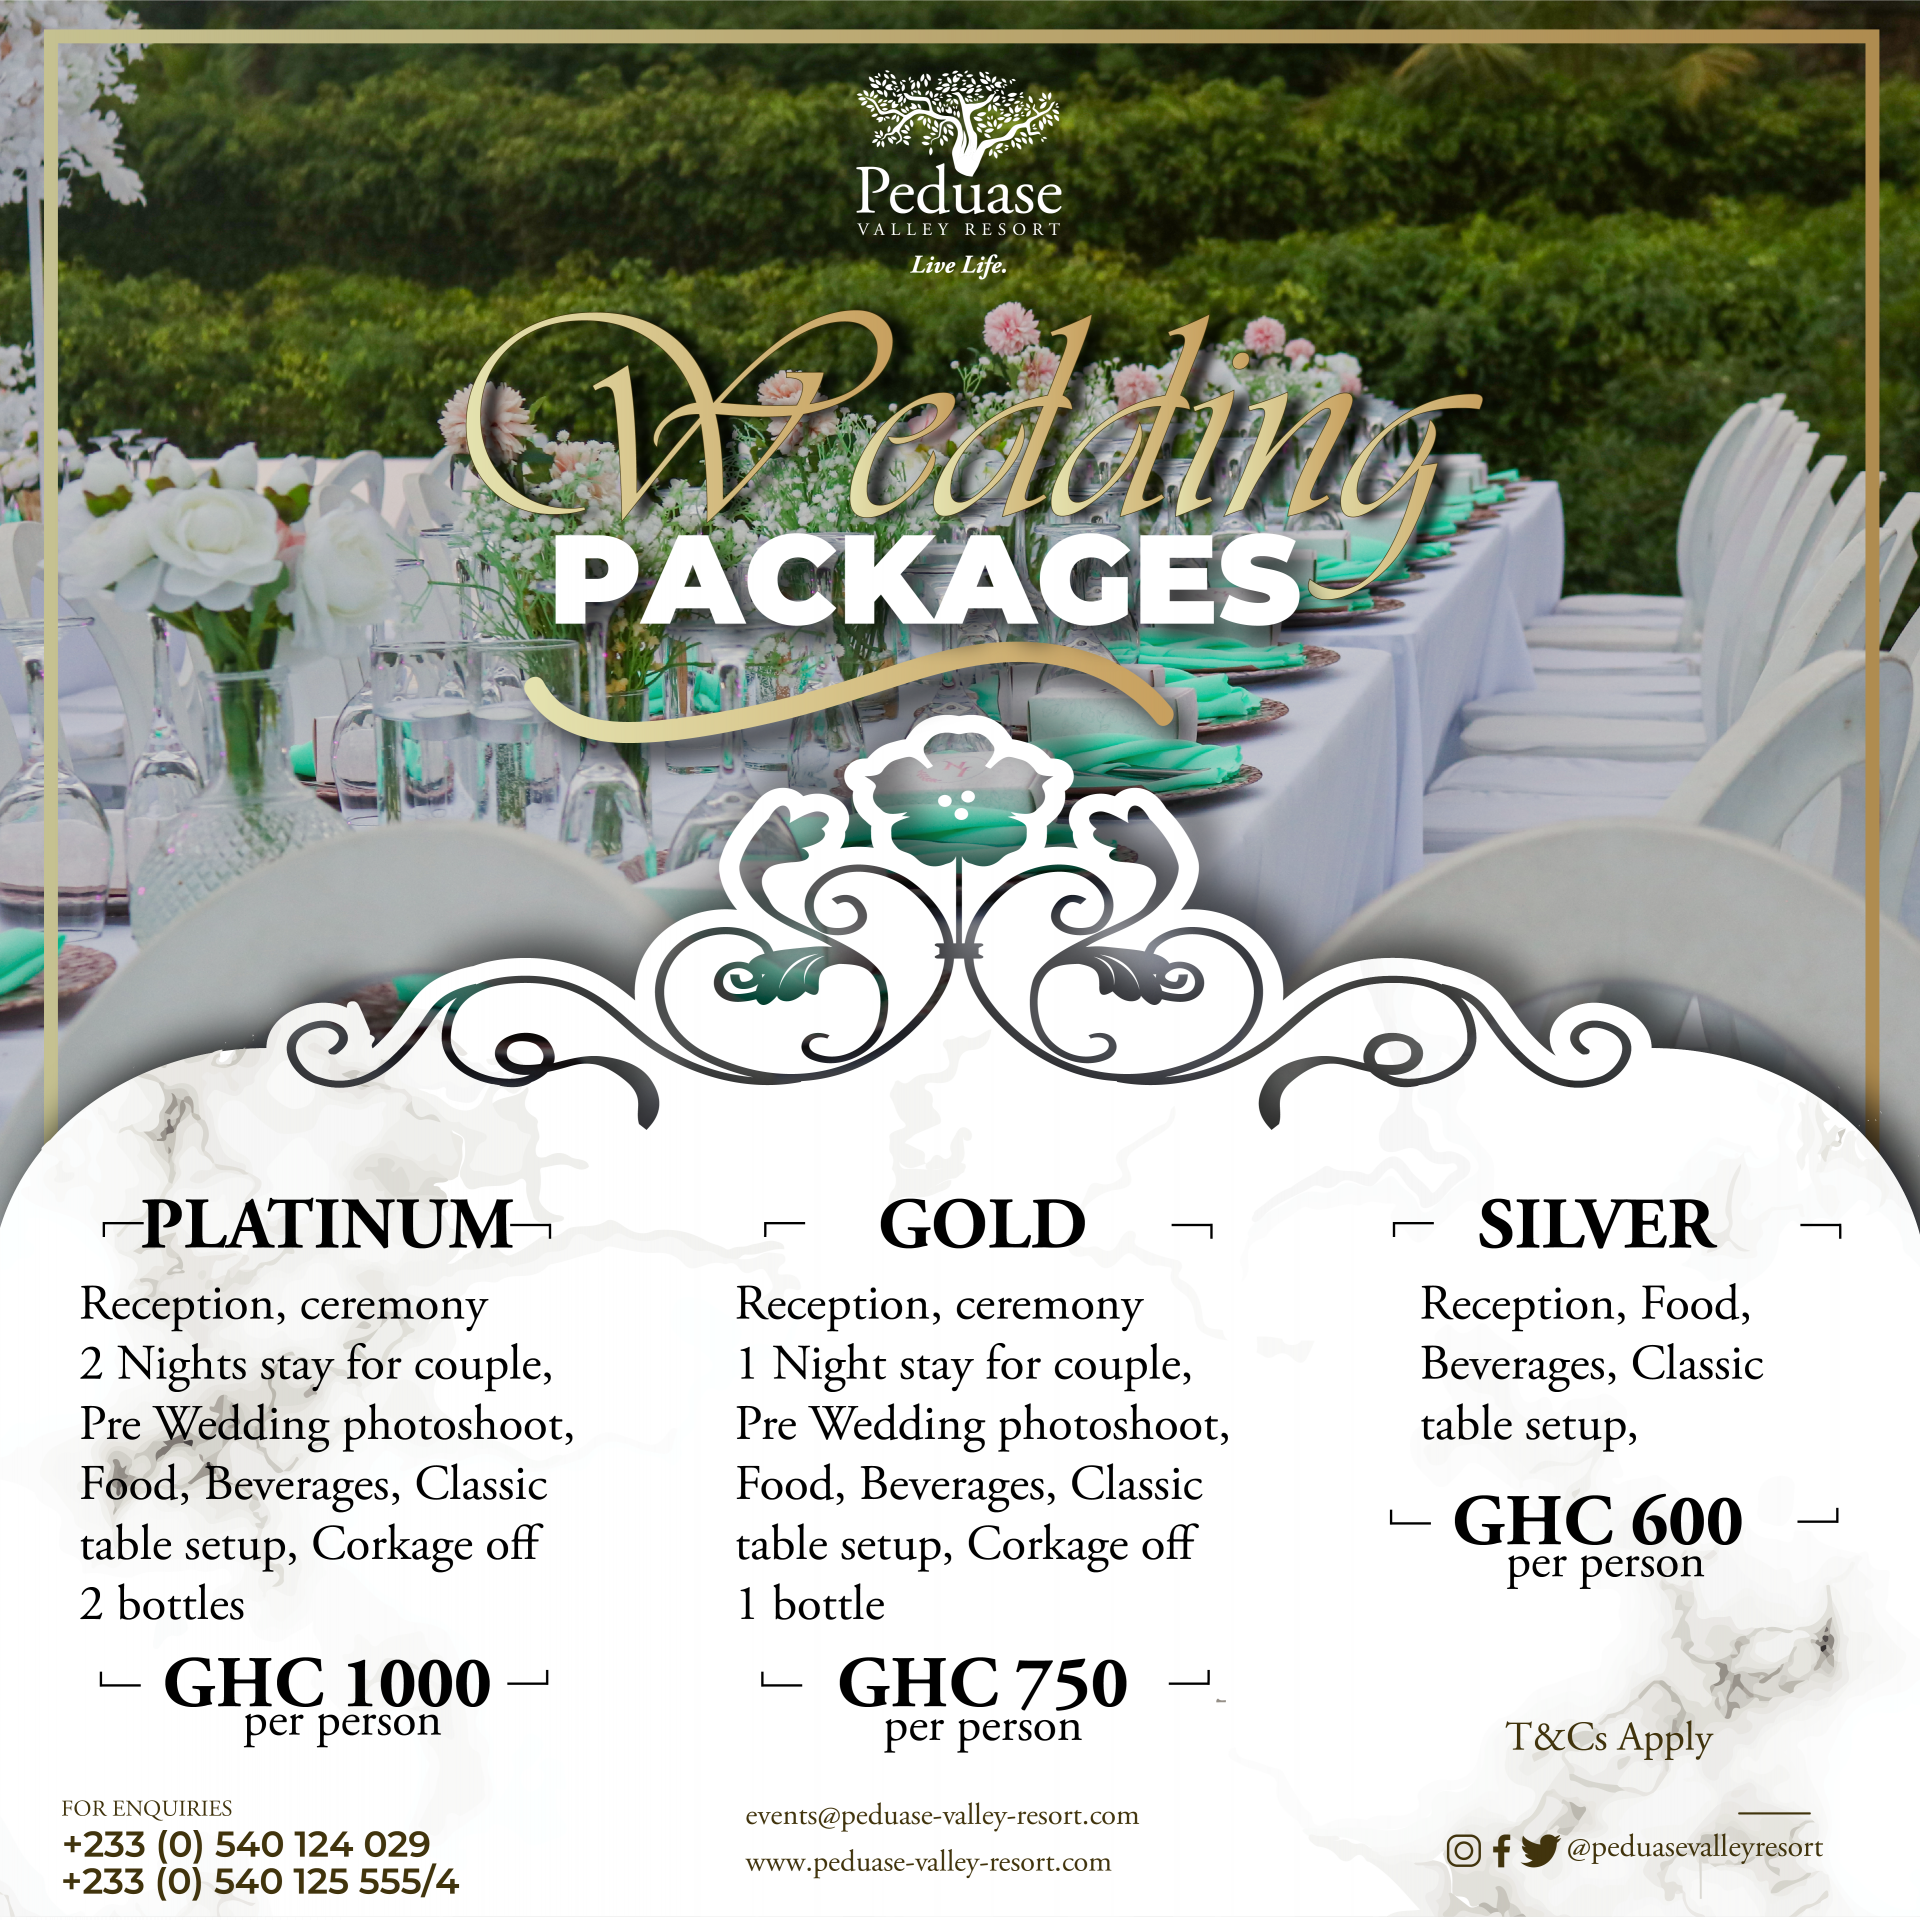 PVR Wedding Packages